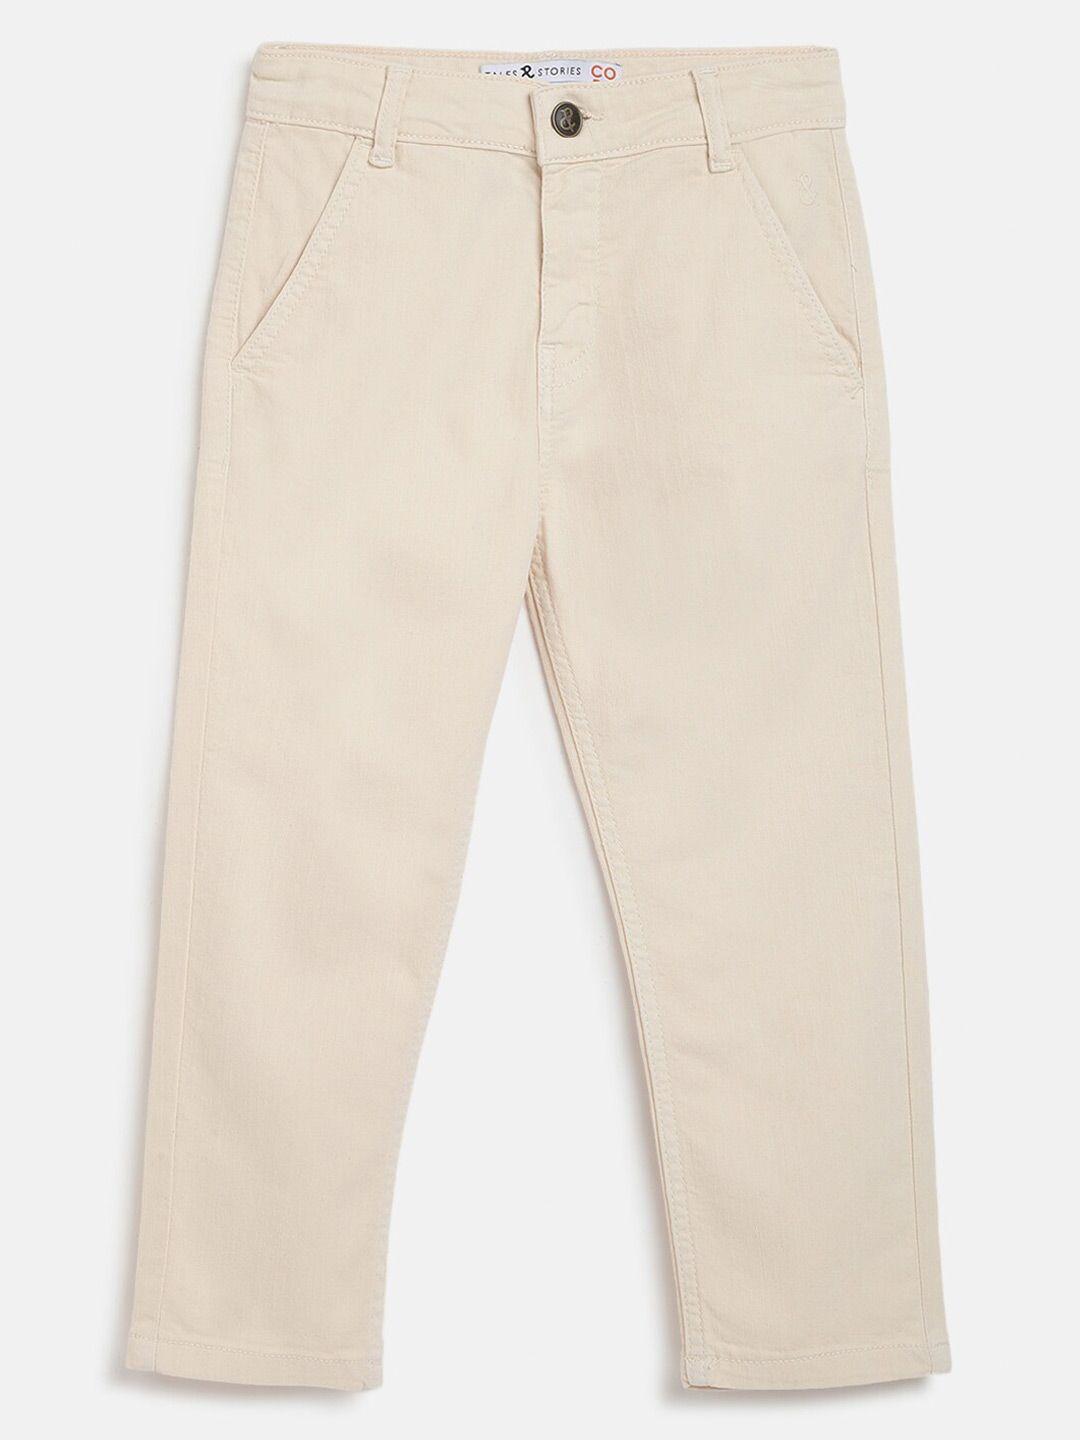 tales-&-stories-boys-mid-rise-slim-fit-chinos-trousers